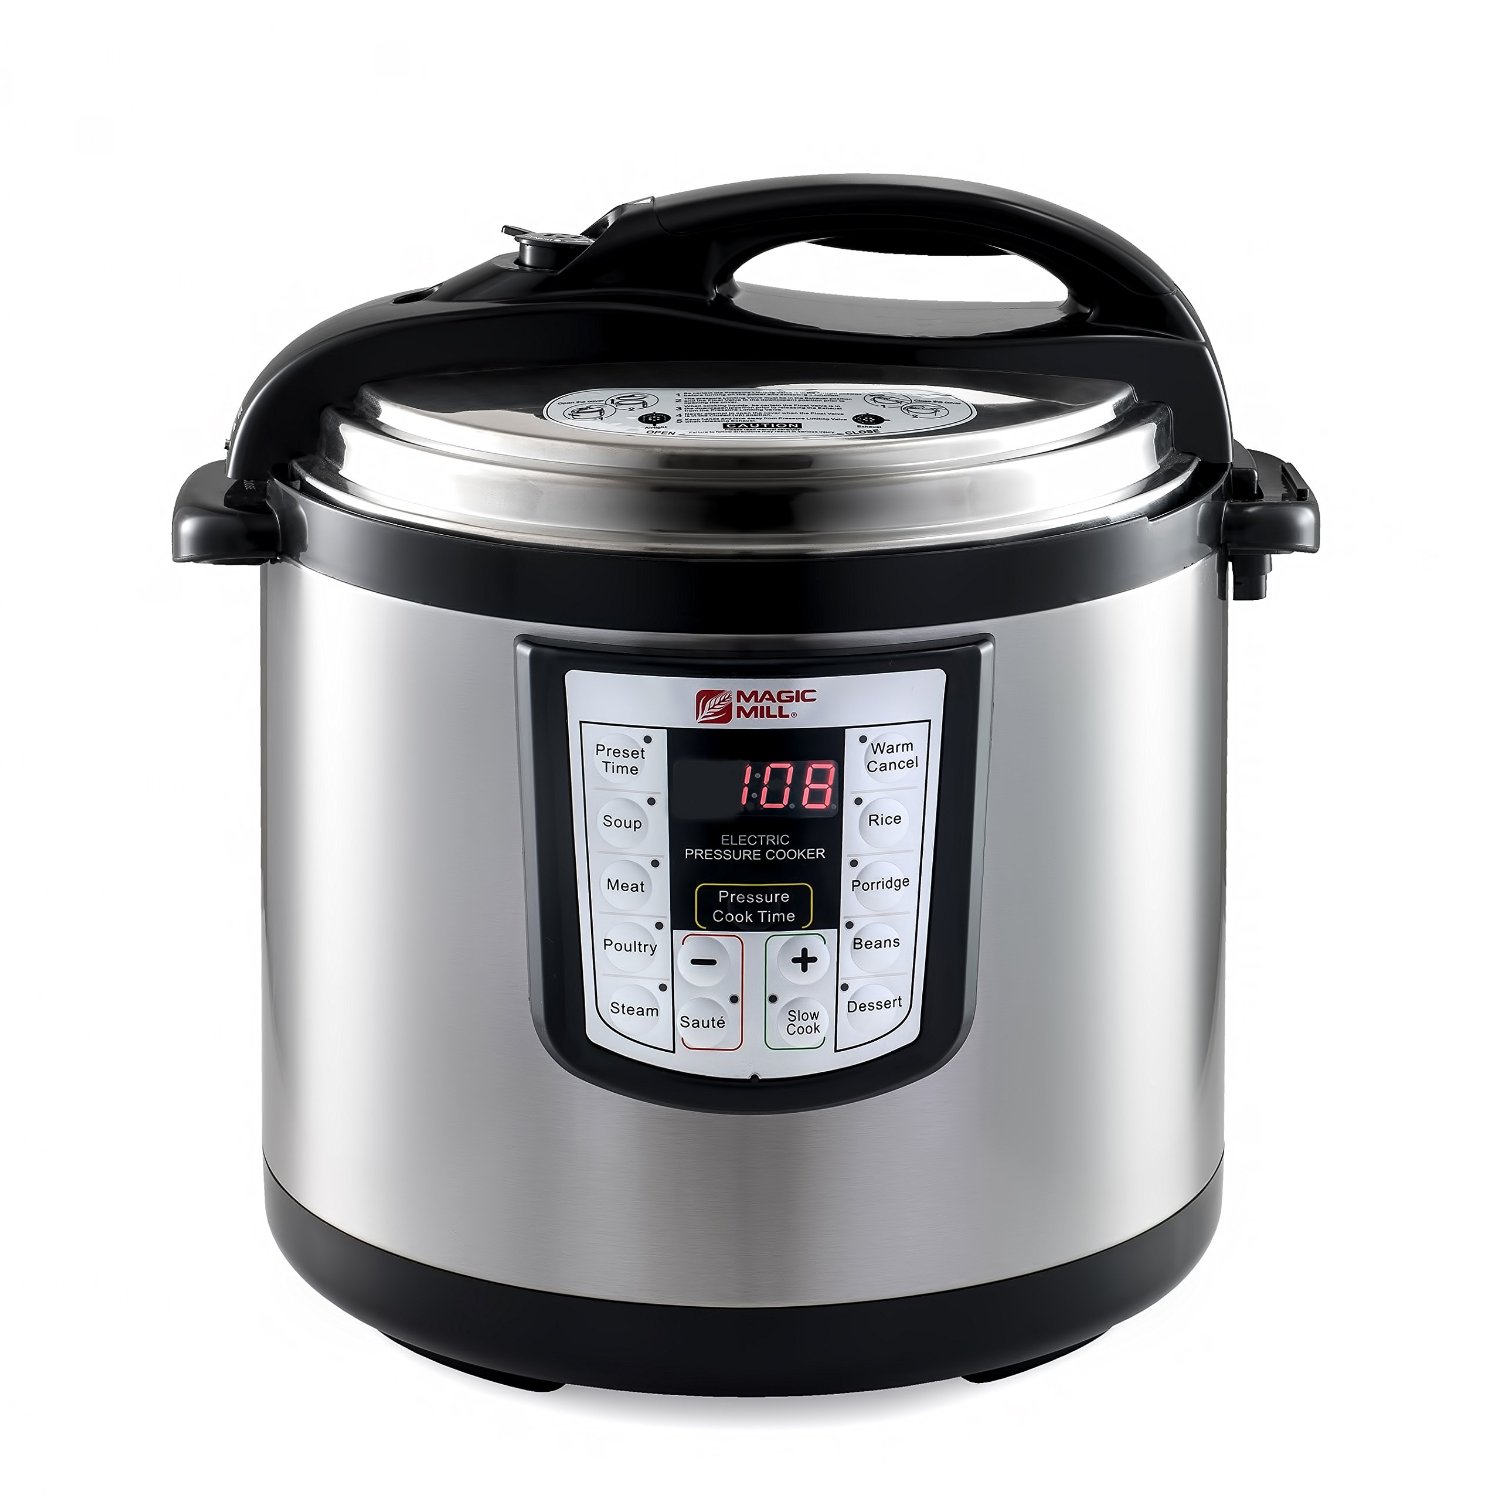 Magic Mill Programmable Electric Pressure Cooker